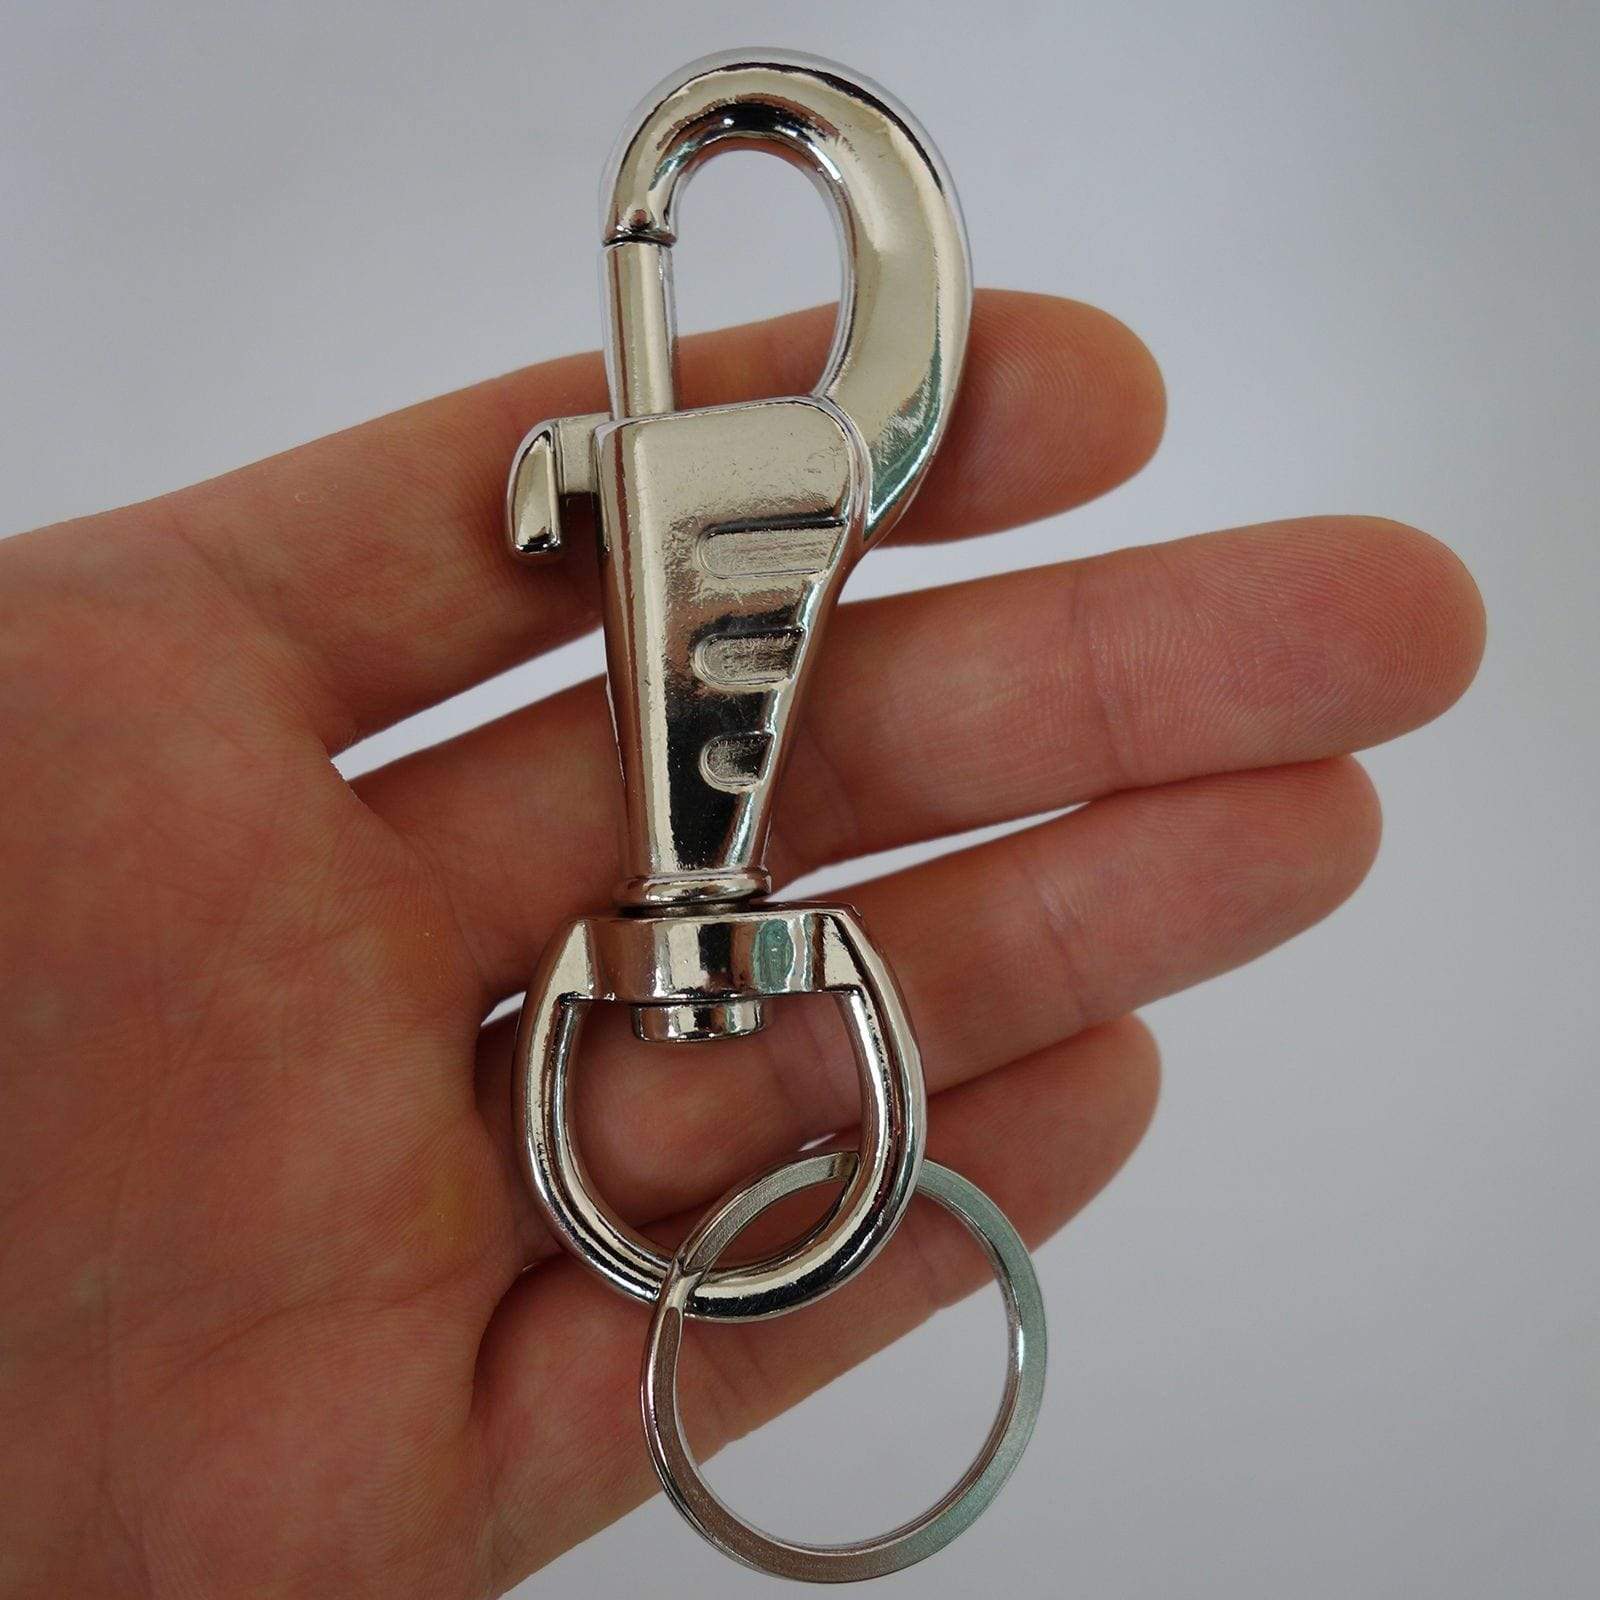 Strong Metal Keyring Keychain Key Ring Chain Trousers Belt Dog Collar Lead Clip Strong Metal Keyring Keychain Key Ring Chain Trousers Belt Dog Collar Lead Clip